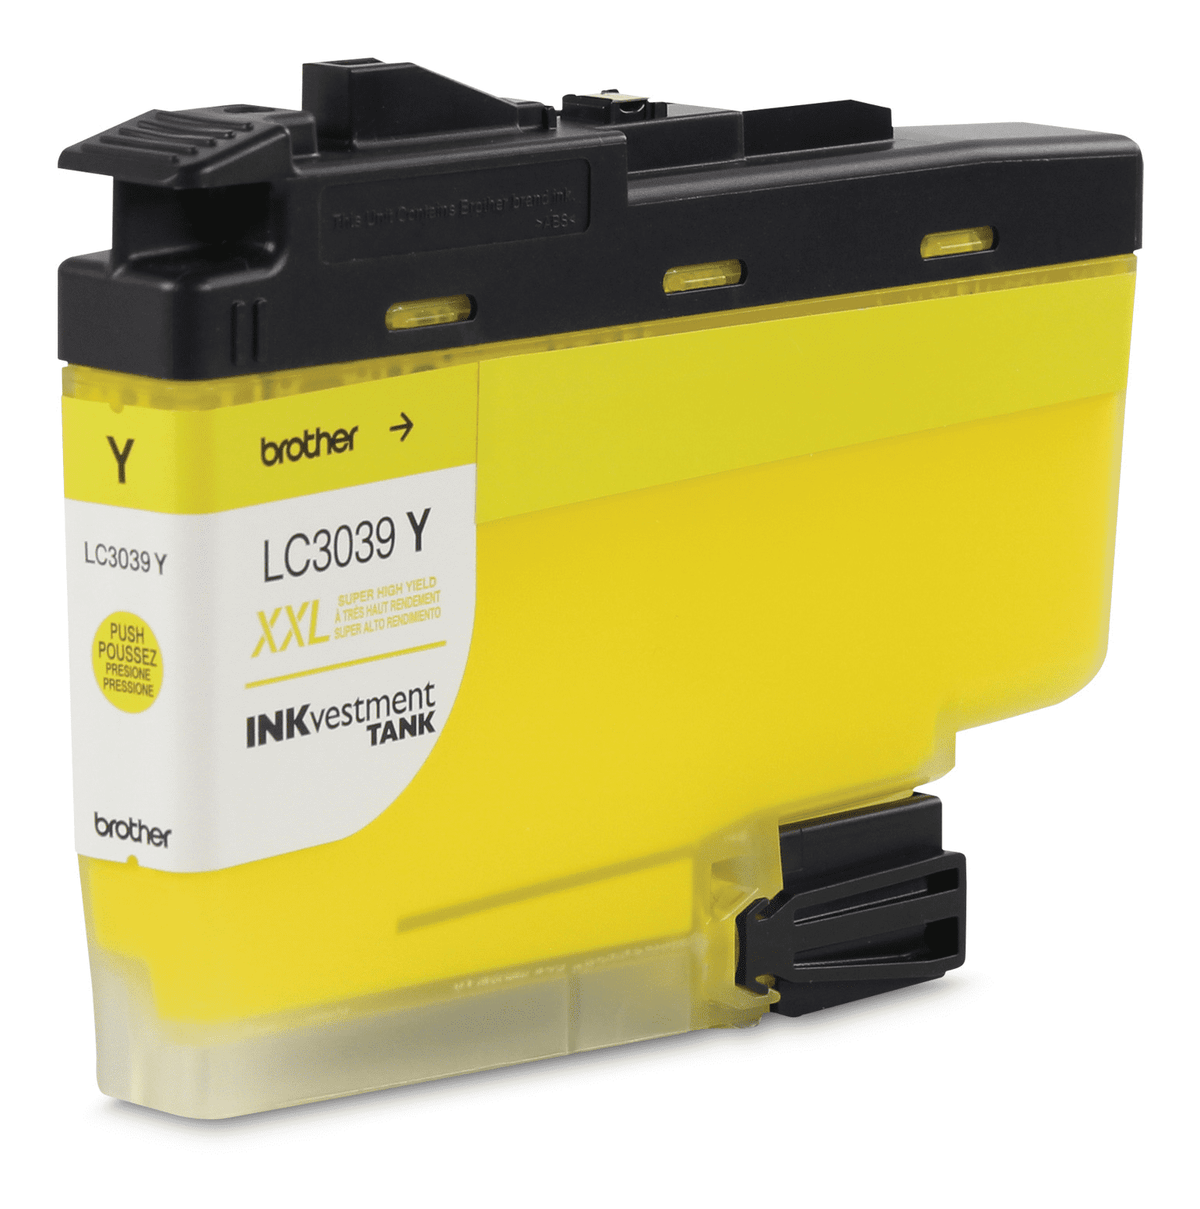 Brother LC3039YS Yellow INKvestment Tank Ink Cartridge, Ultra High Yield